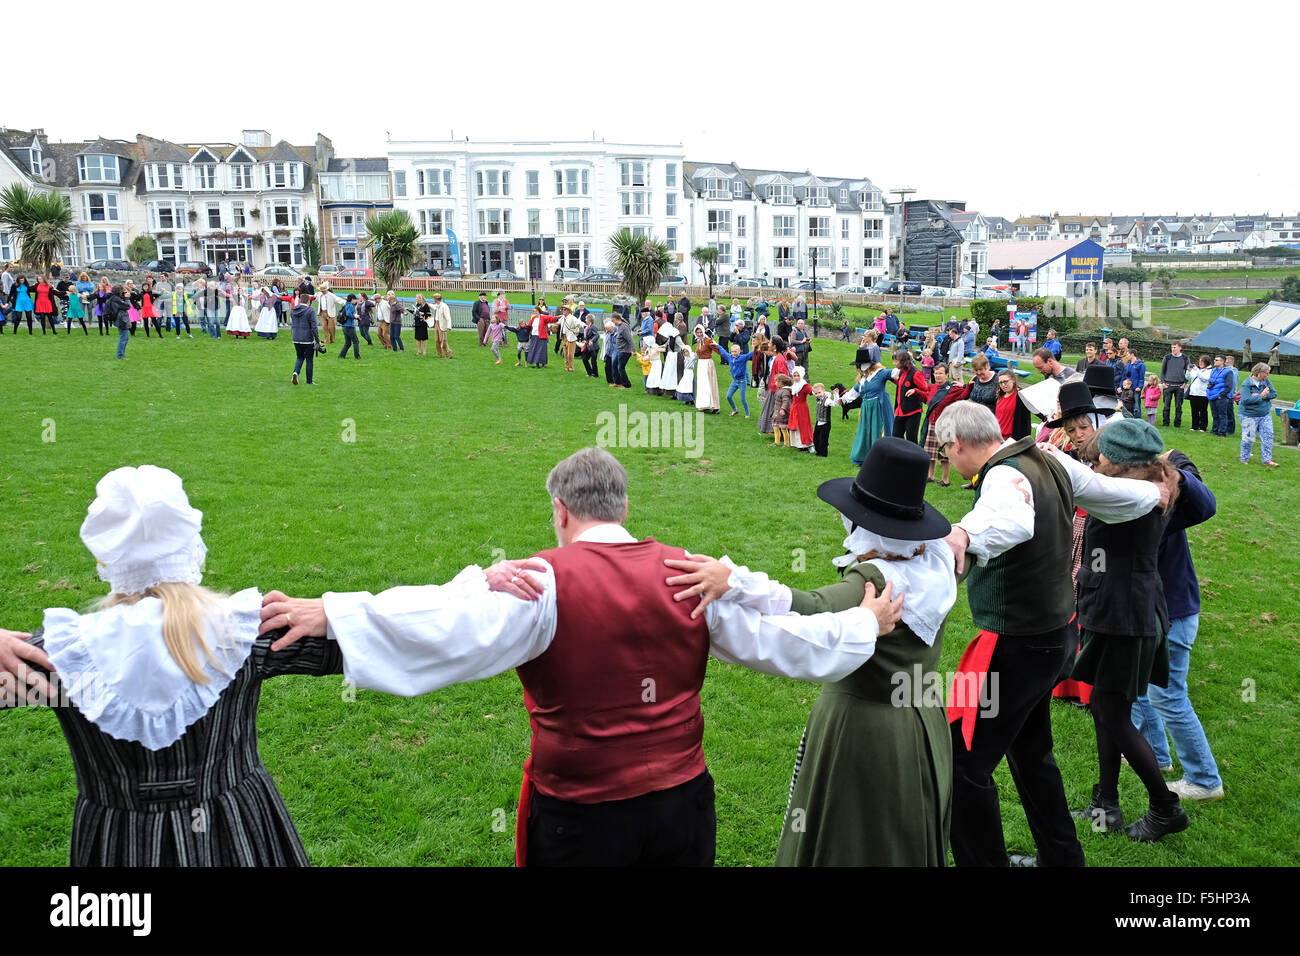 Ceilidh dancing at a Celtic festival held in Newquay, Cornwall, UK Stock Photo